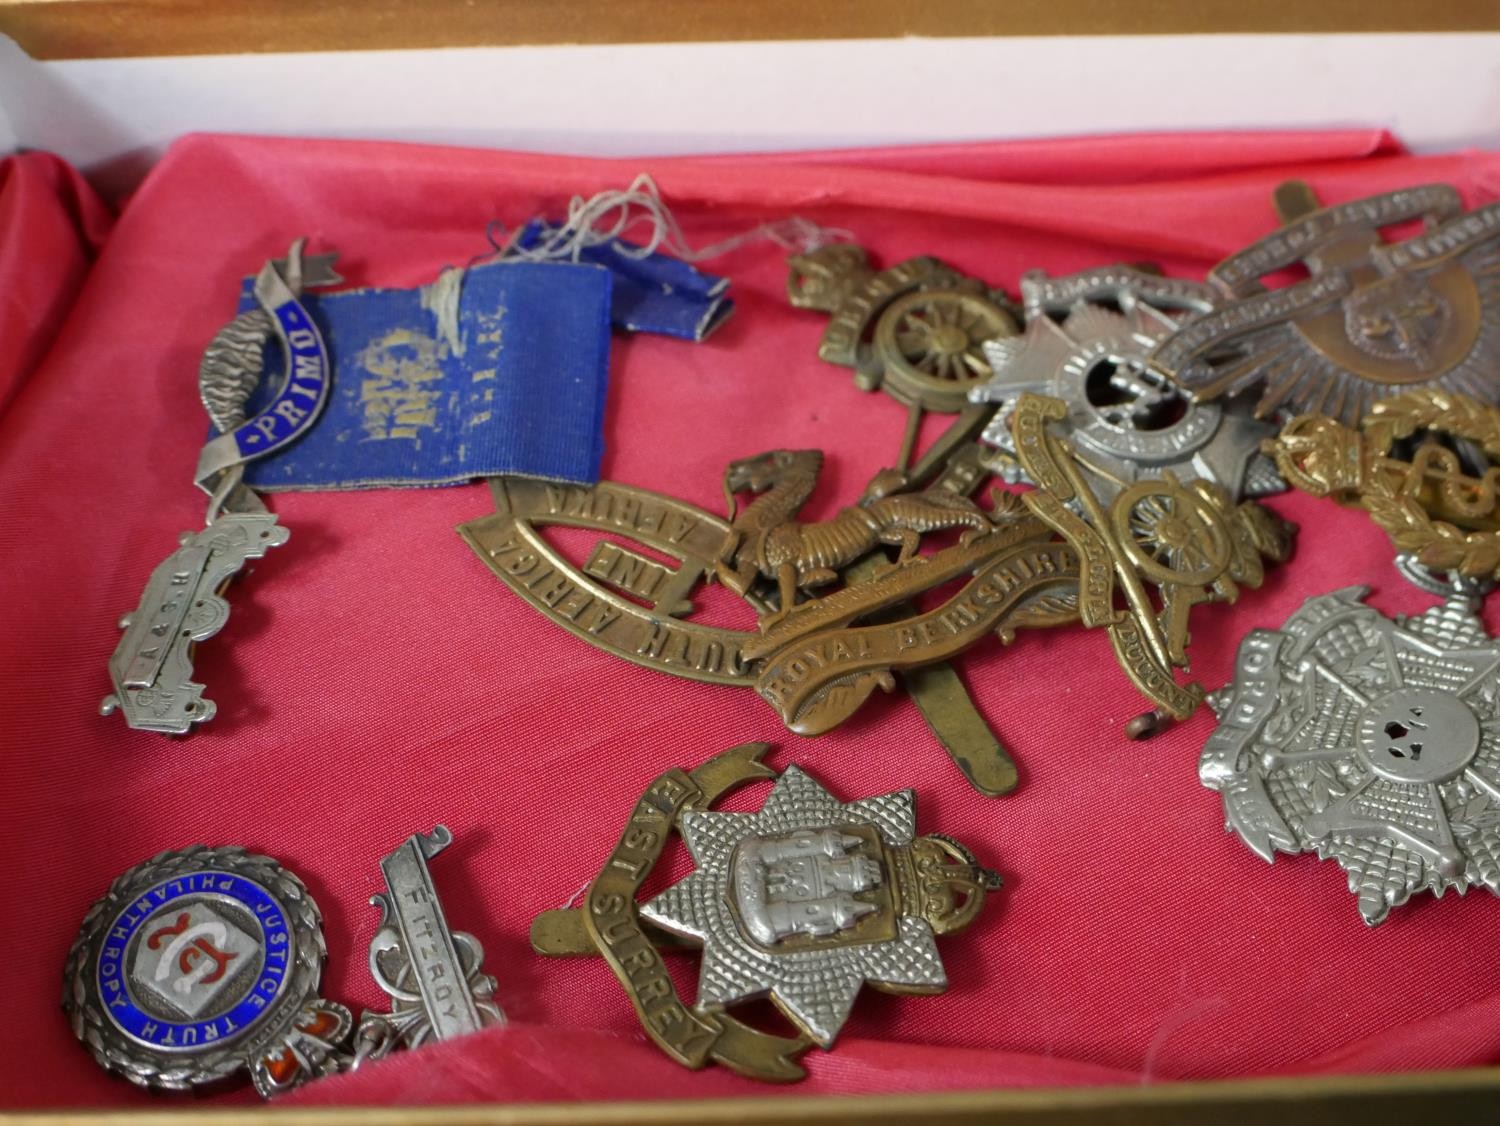 Assorted regimental cap badges, together with some military buttons and medallions. - Image 3 of 7